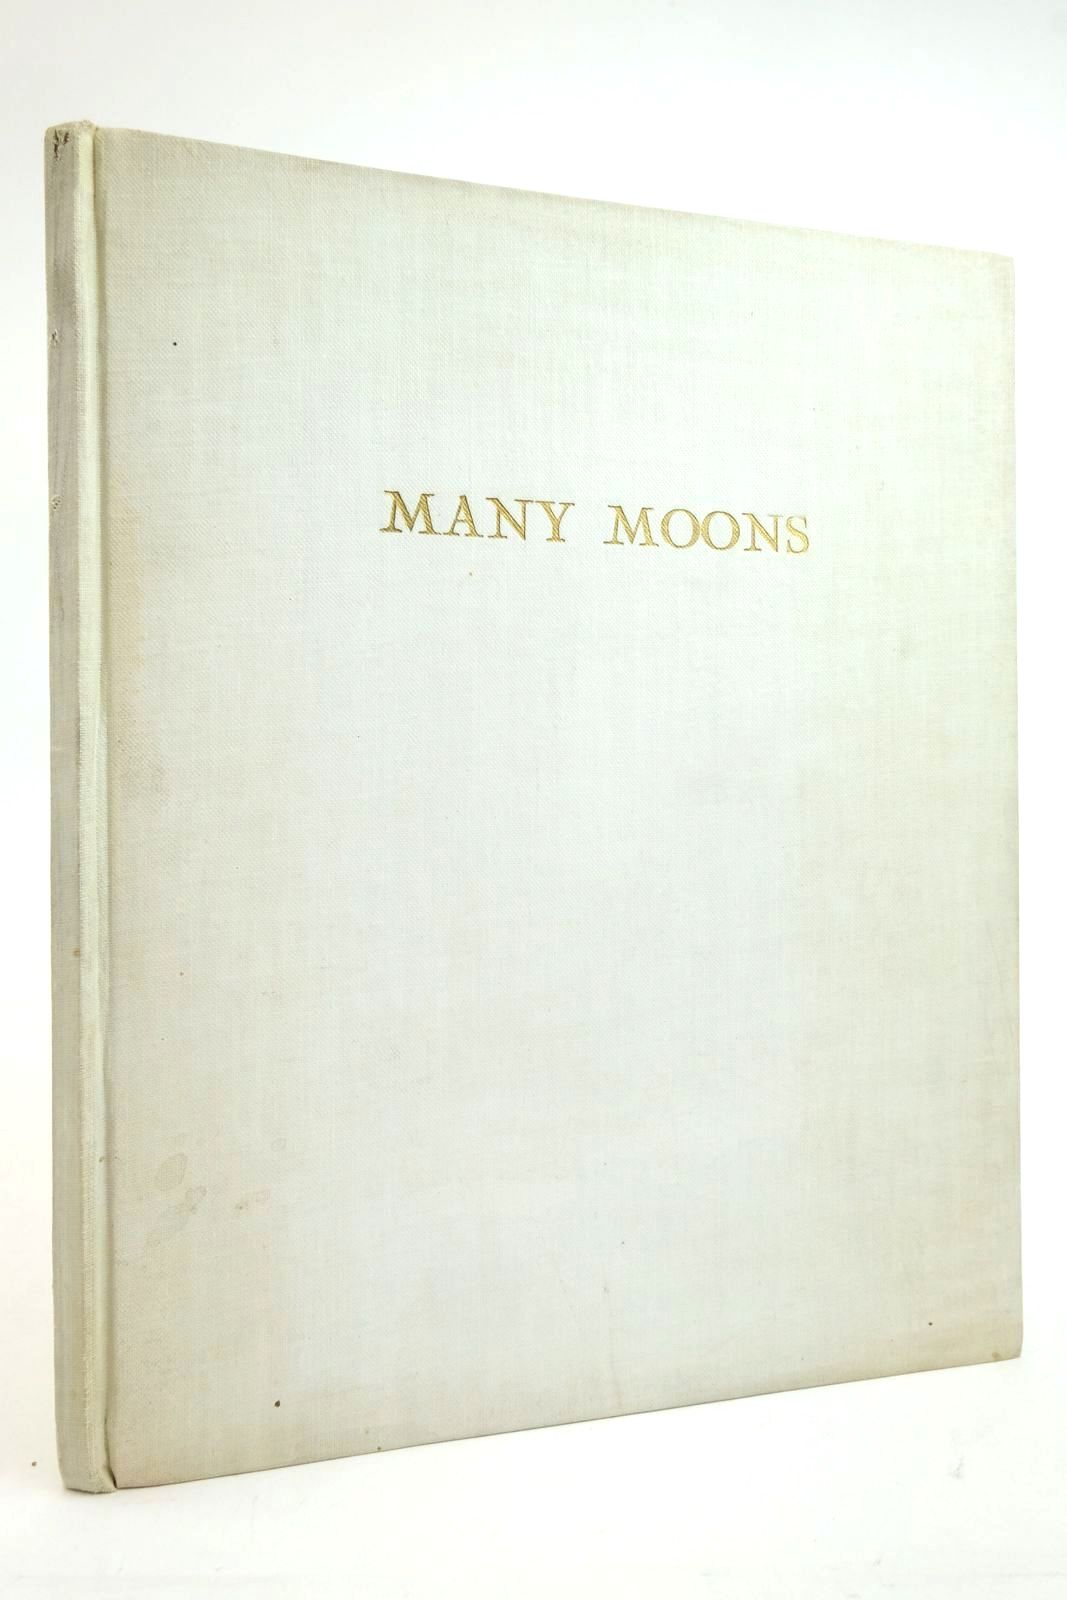 Photo of MANY MOONS written by Mard,  illustrated by Heron, Beshlie (STOCK CODE: 2136212)  for sale by Stella & Rose's Books